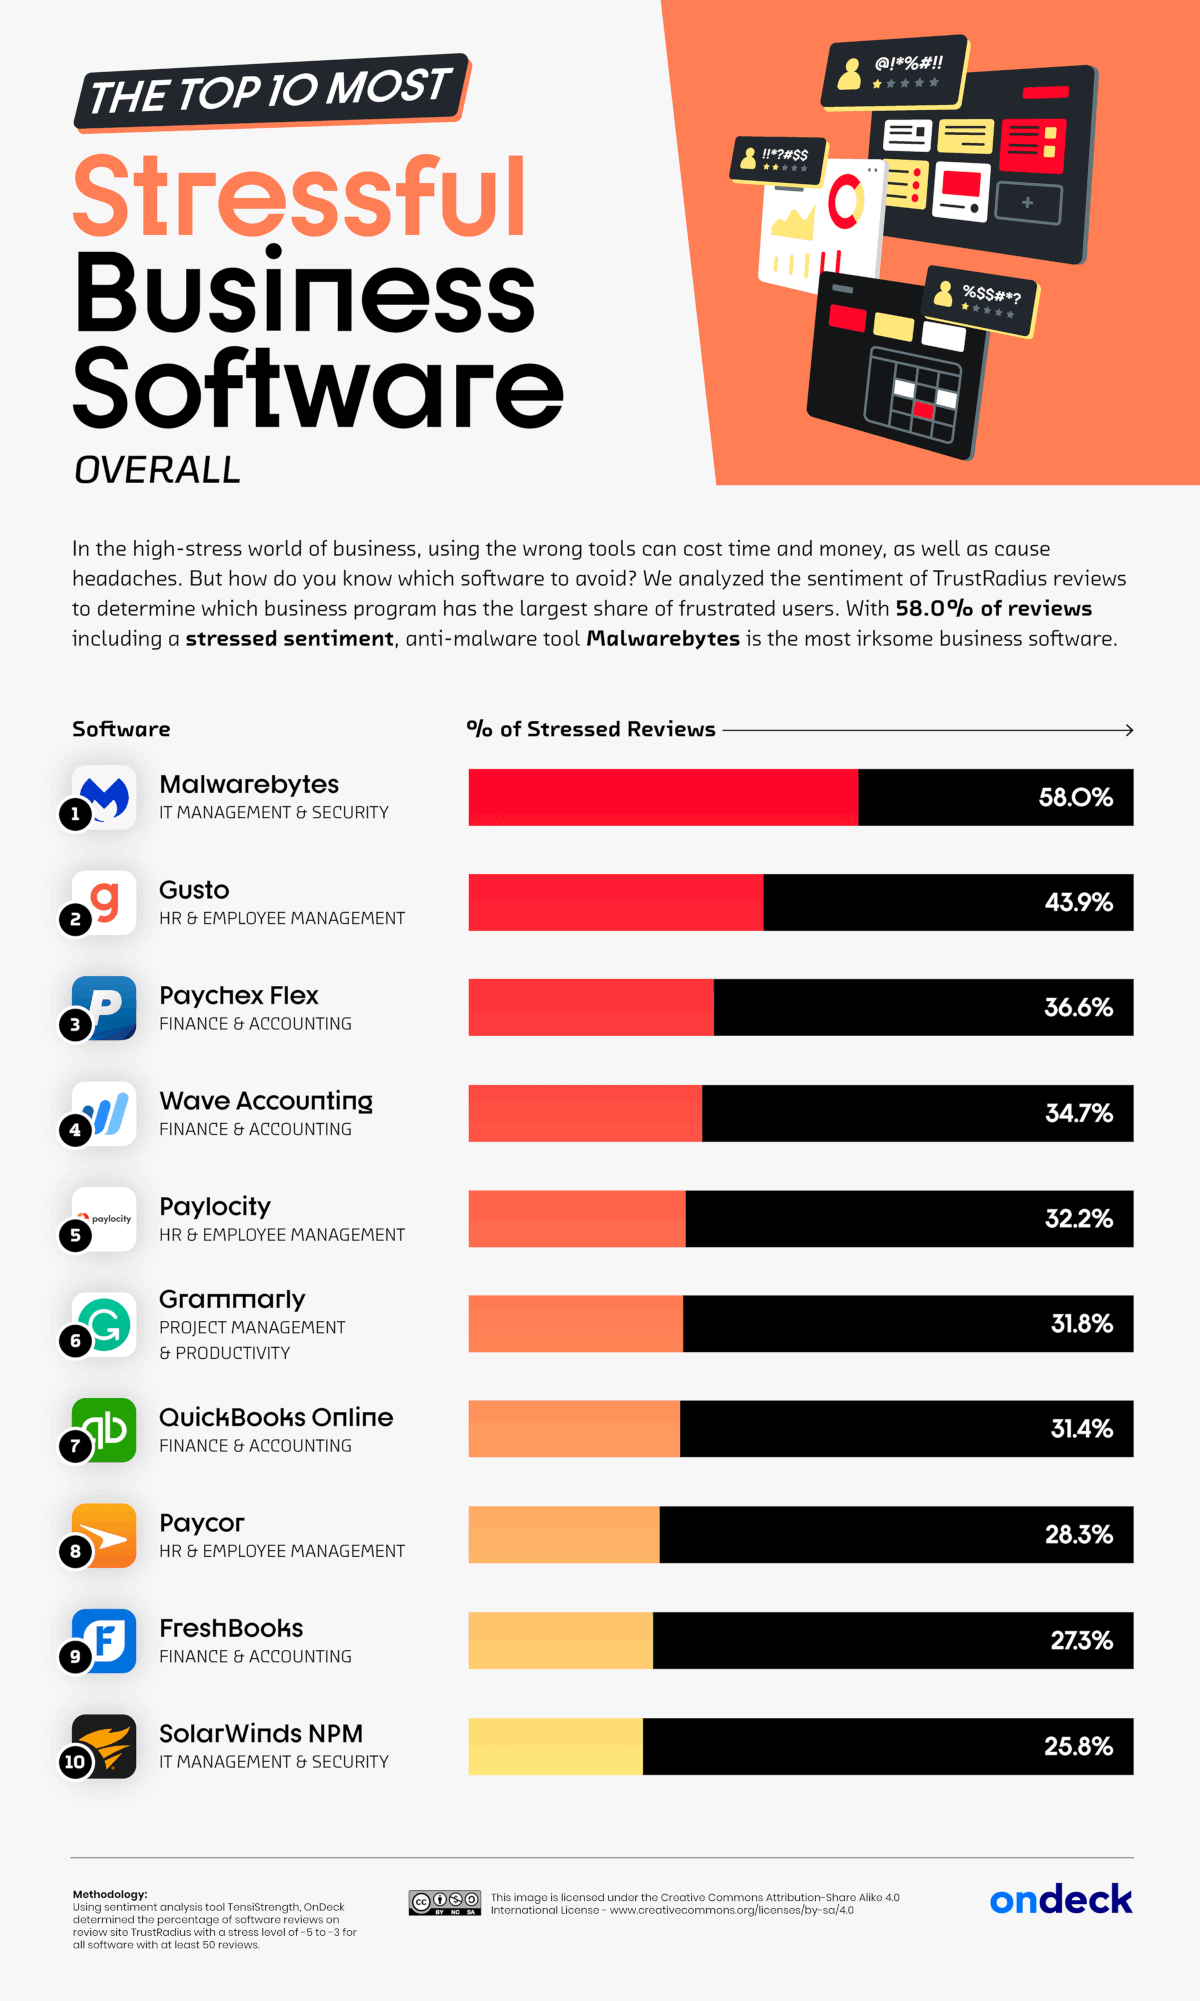 Resume.io infographic on the most stressful business software overall